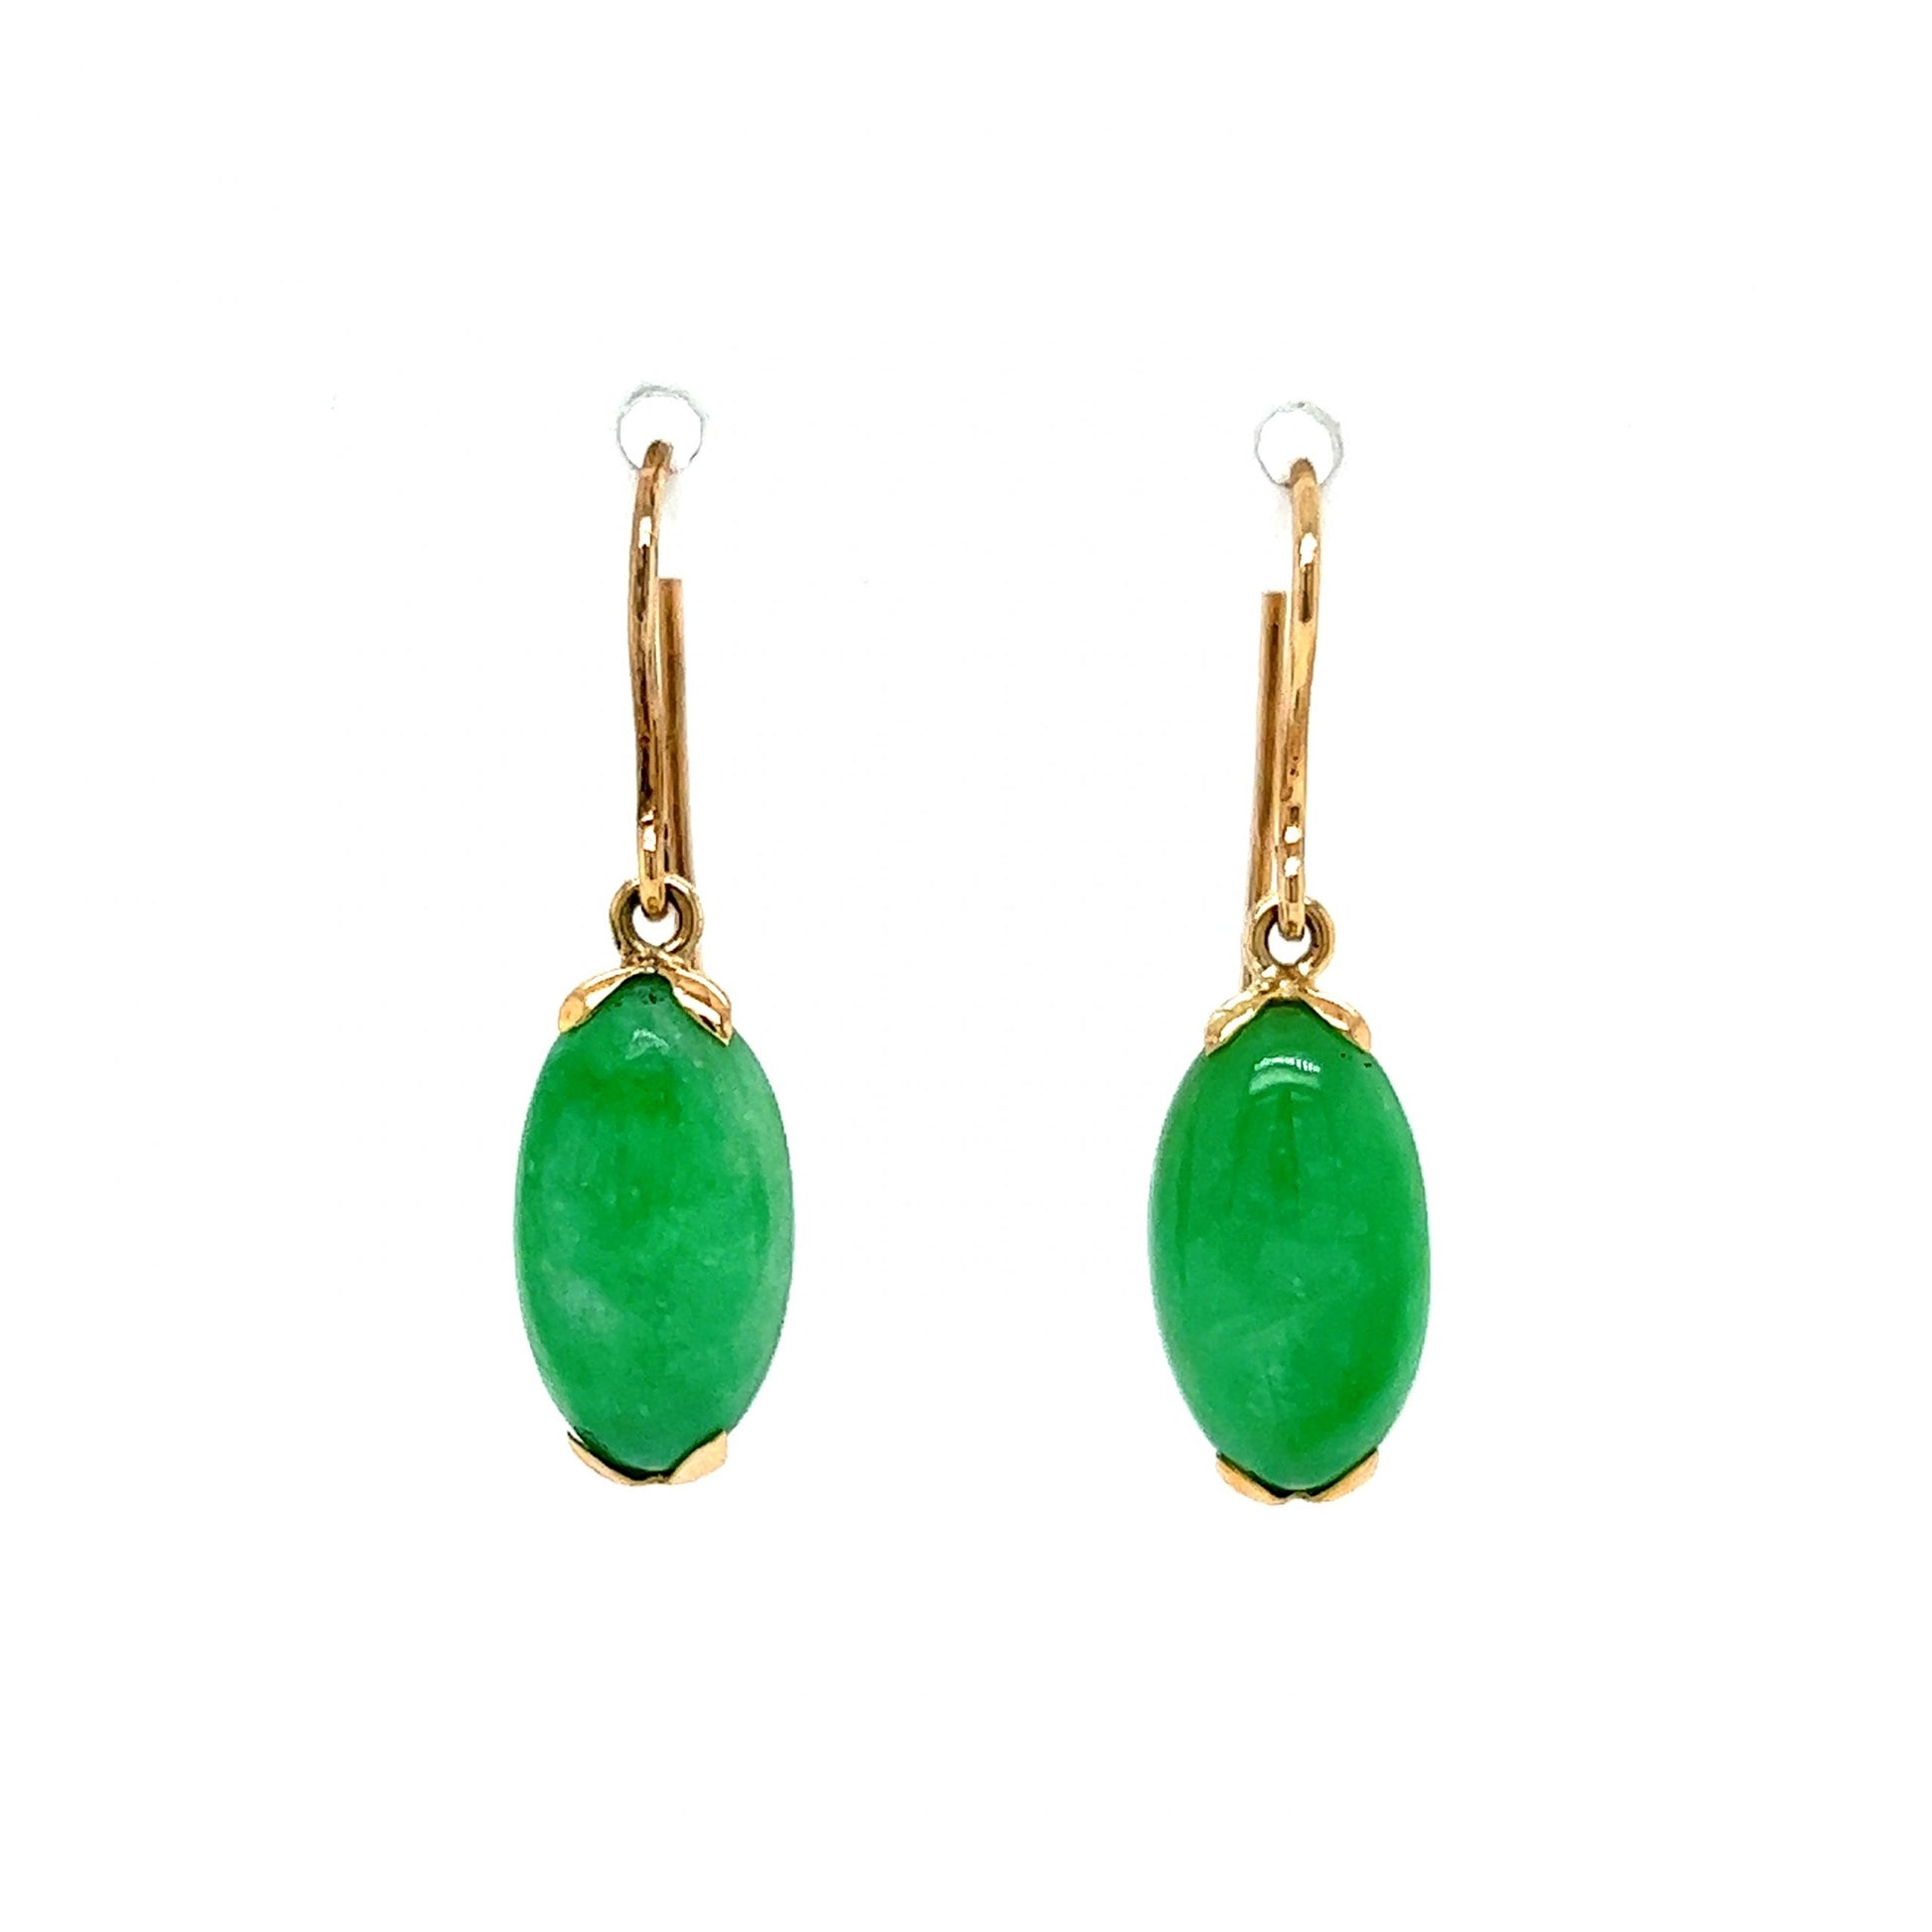 Oval Jade Drop Earrings in 14k Yellow GoldComposition: 14 Karat Yellow Gold Total Gram Weight: 3.0 g